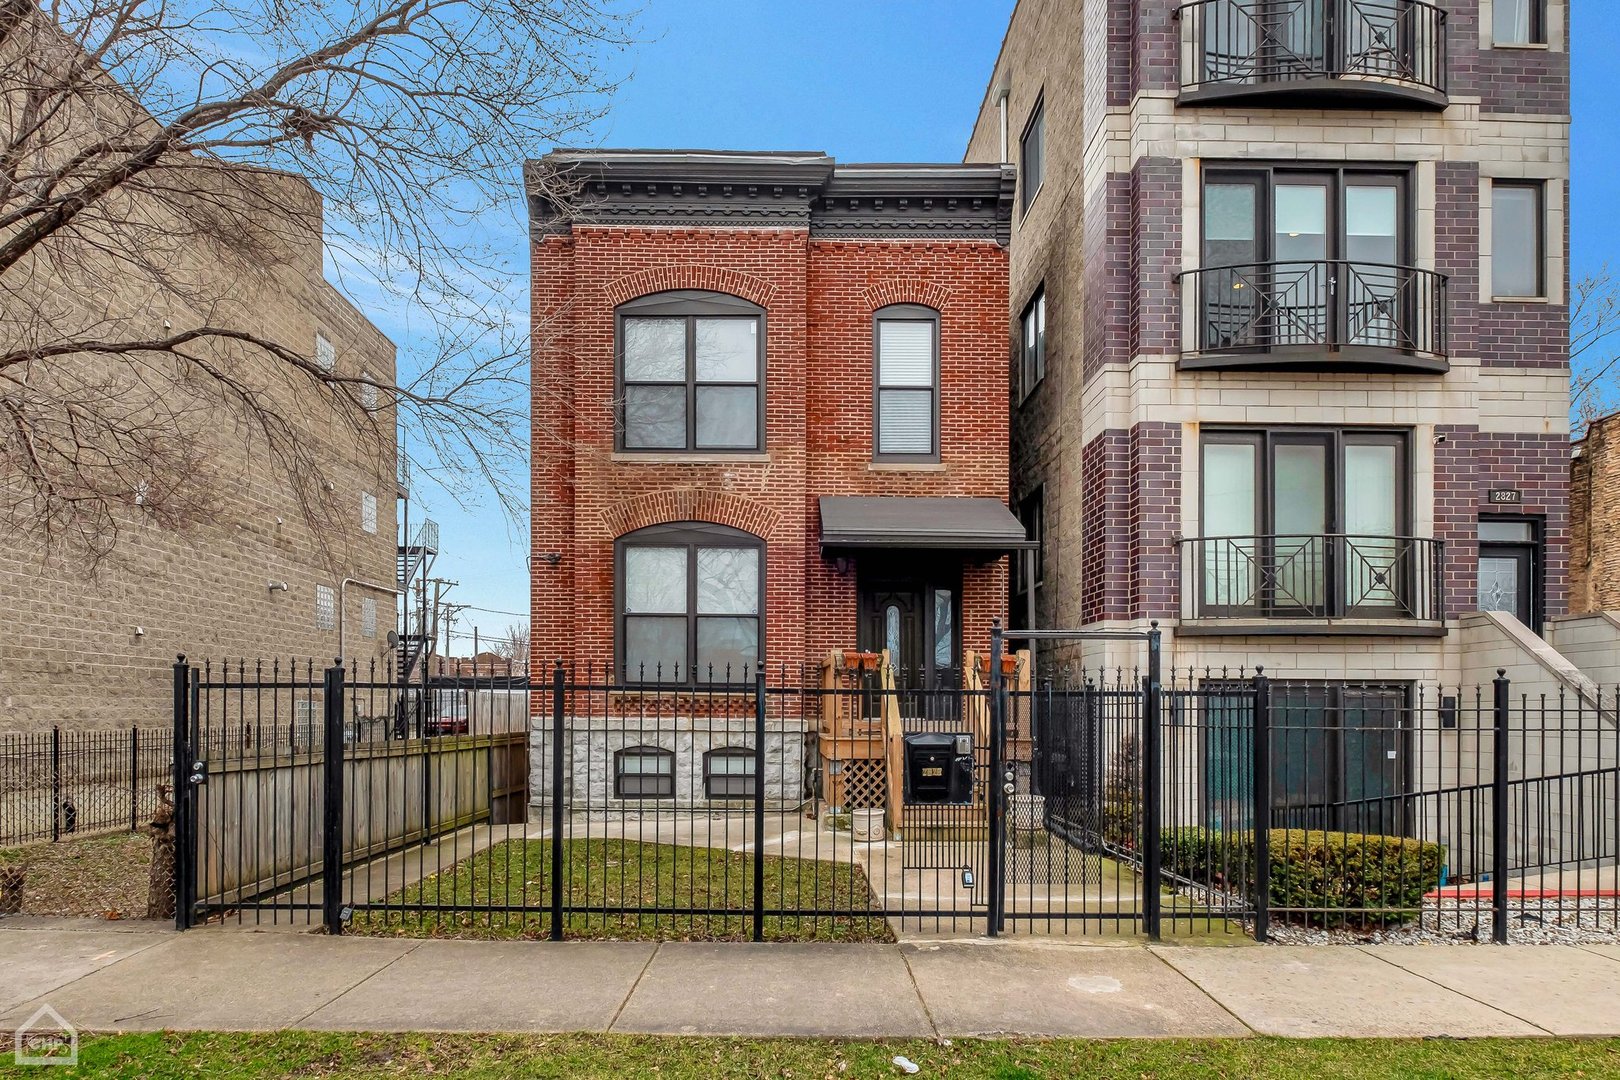 4 House in East Garfield Park